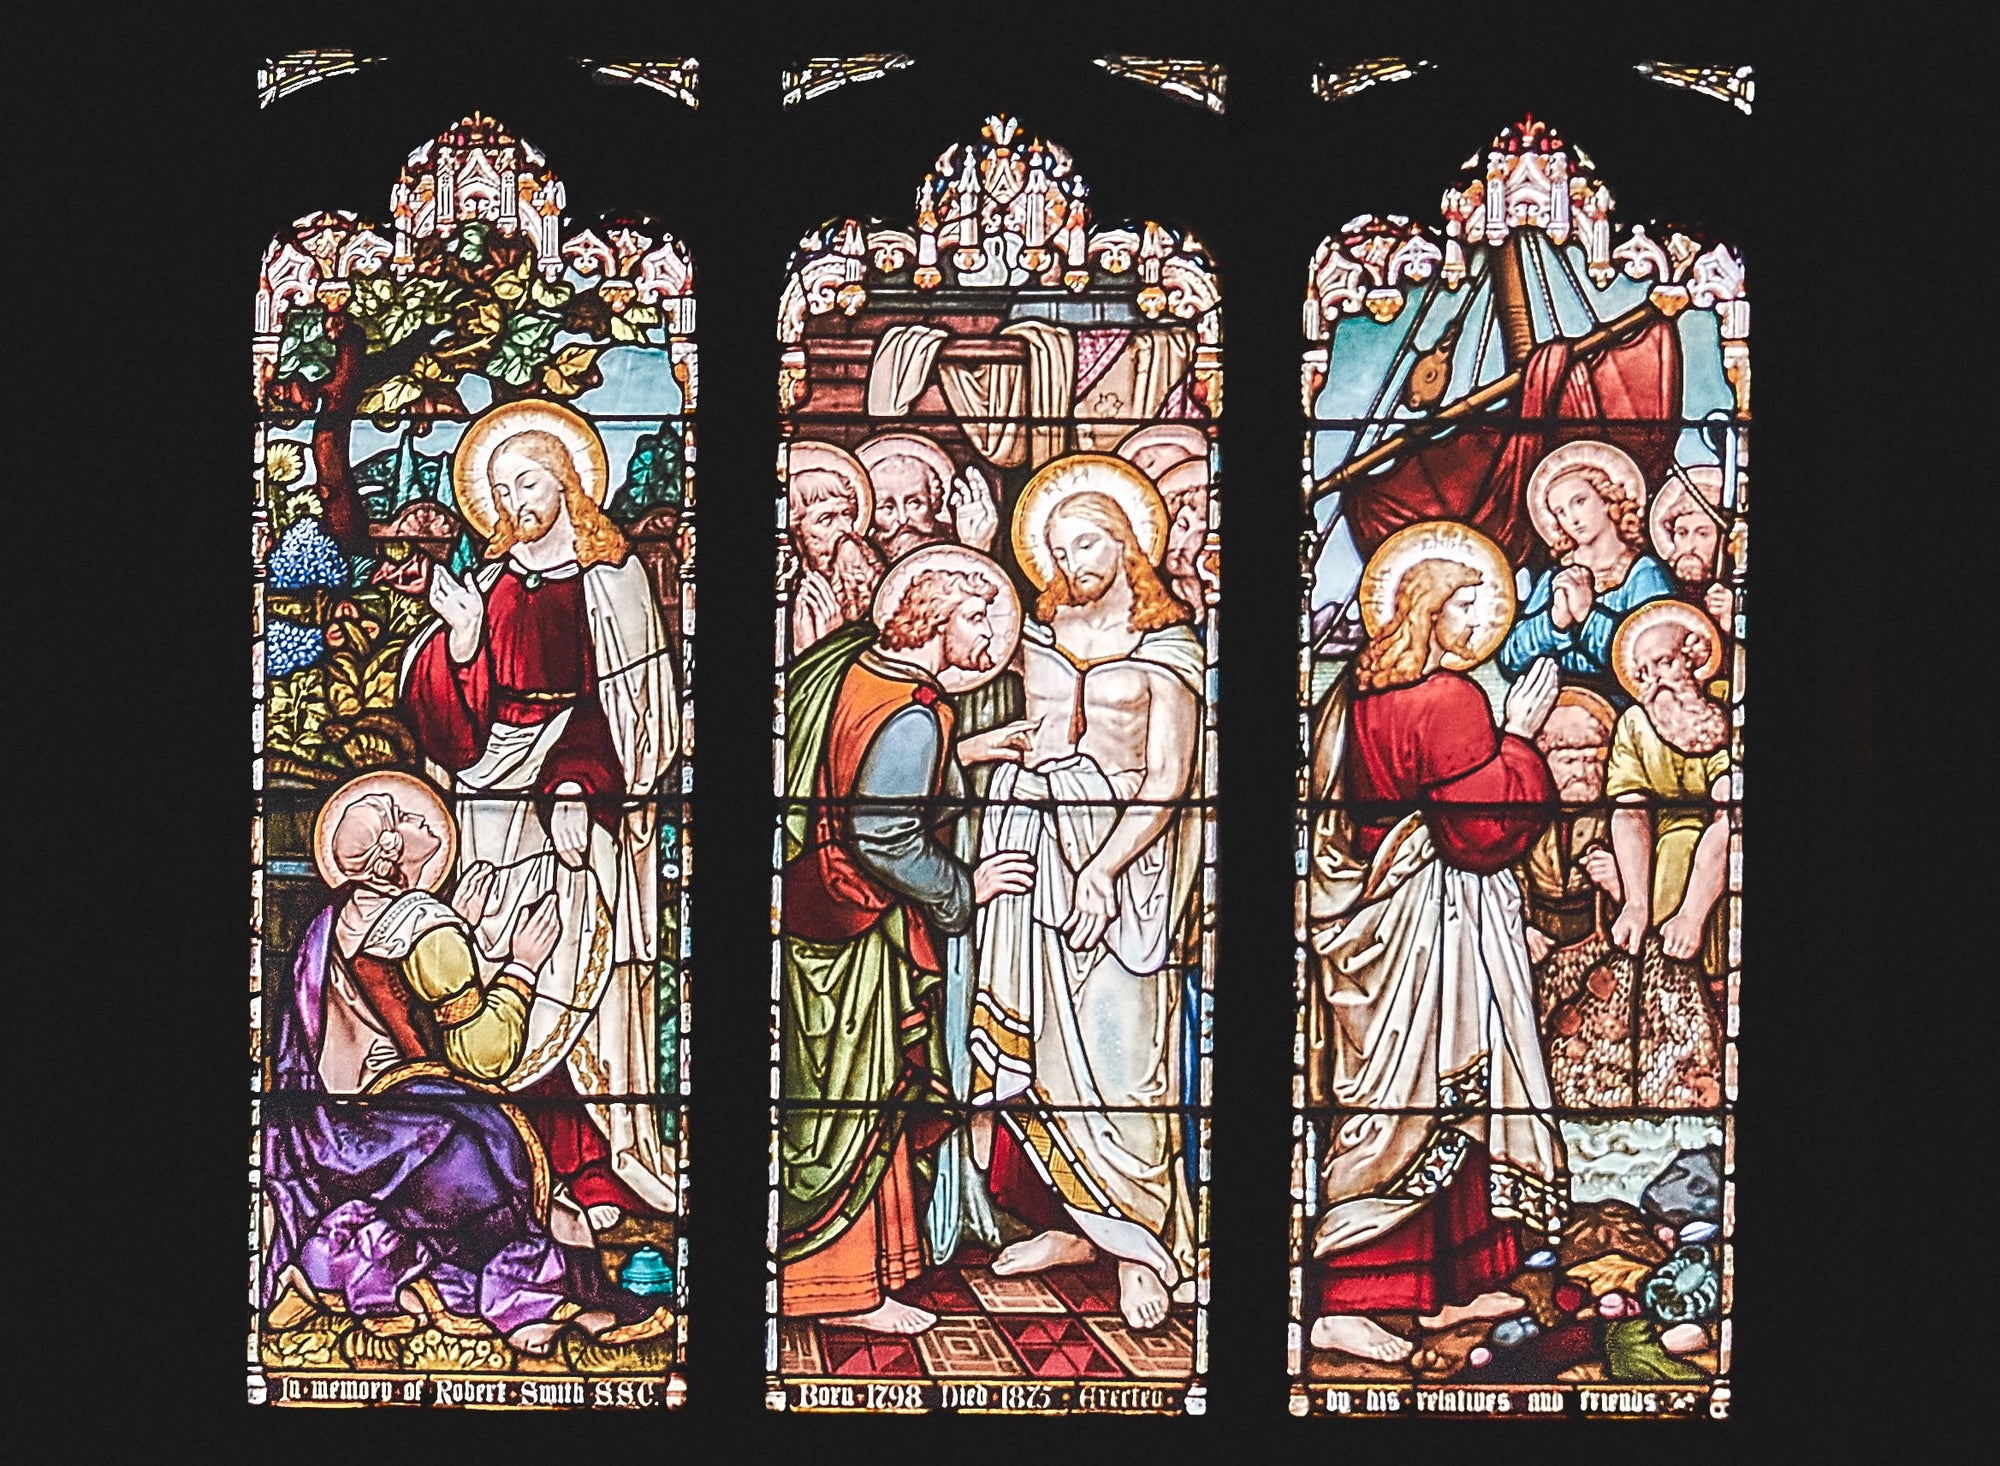 The Easter Season: its history and how we can live it better